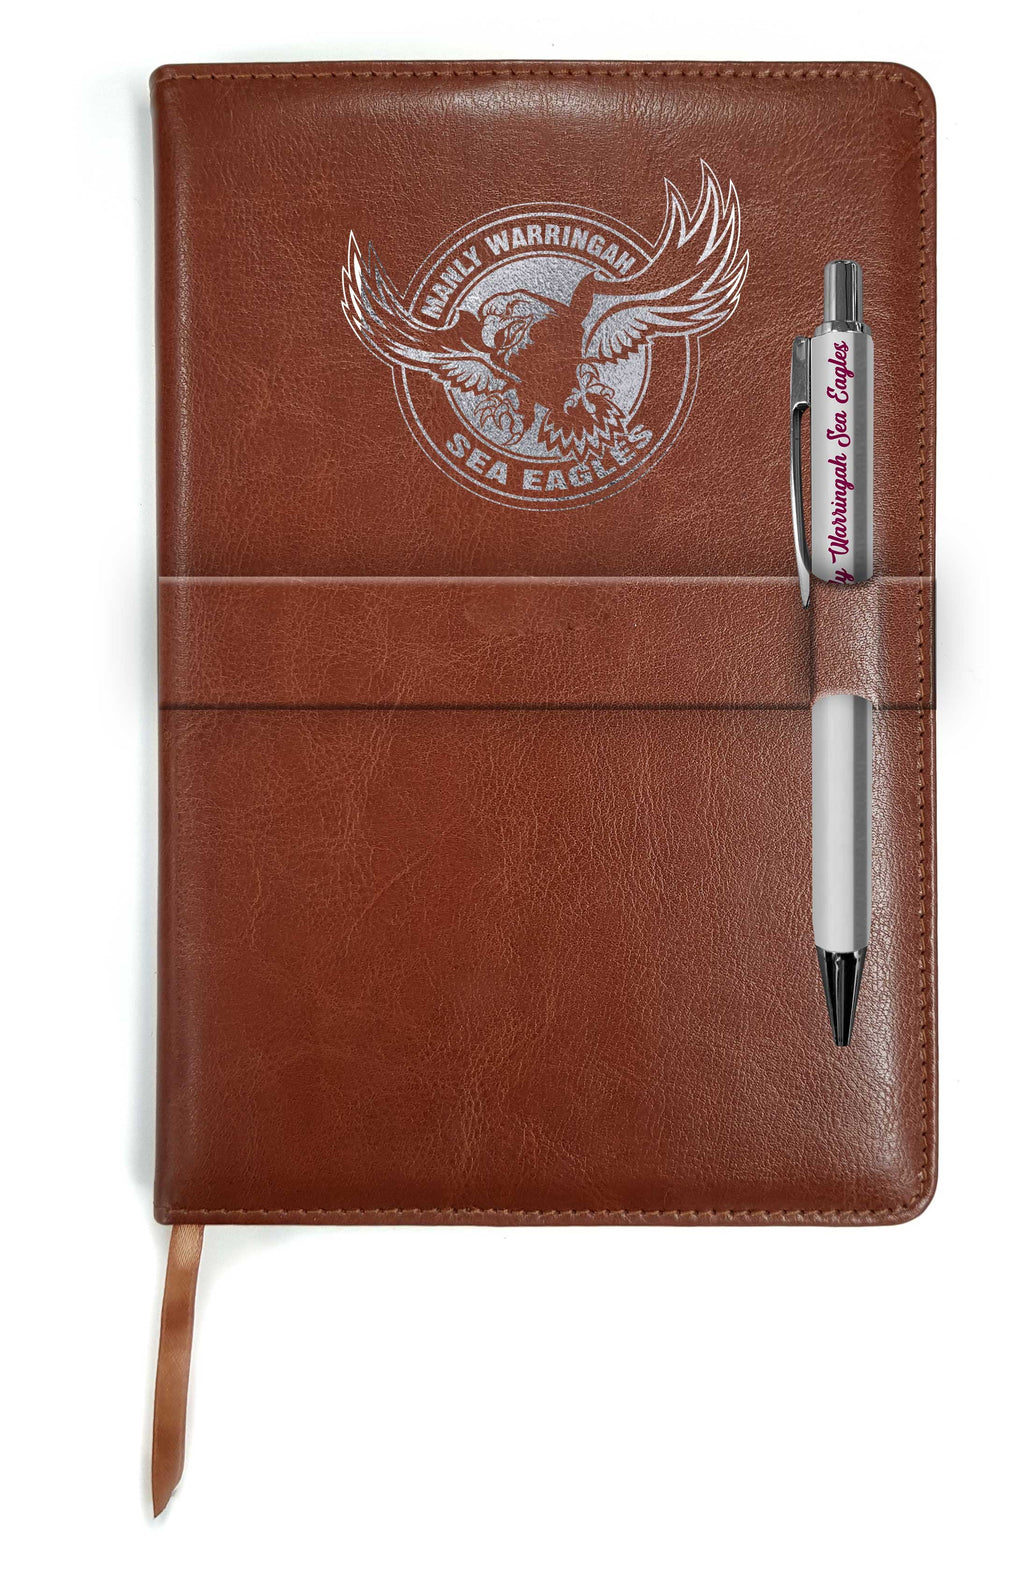 Manly Sea Eagles Notebook And Pen